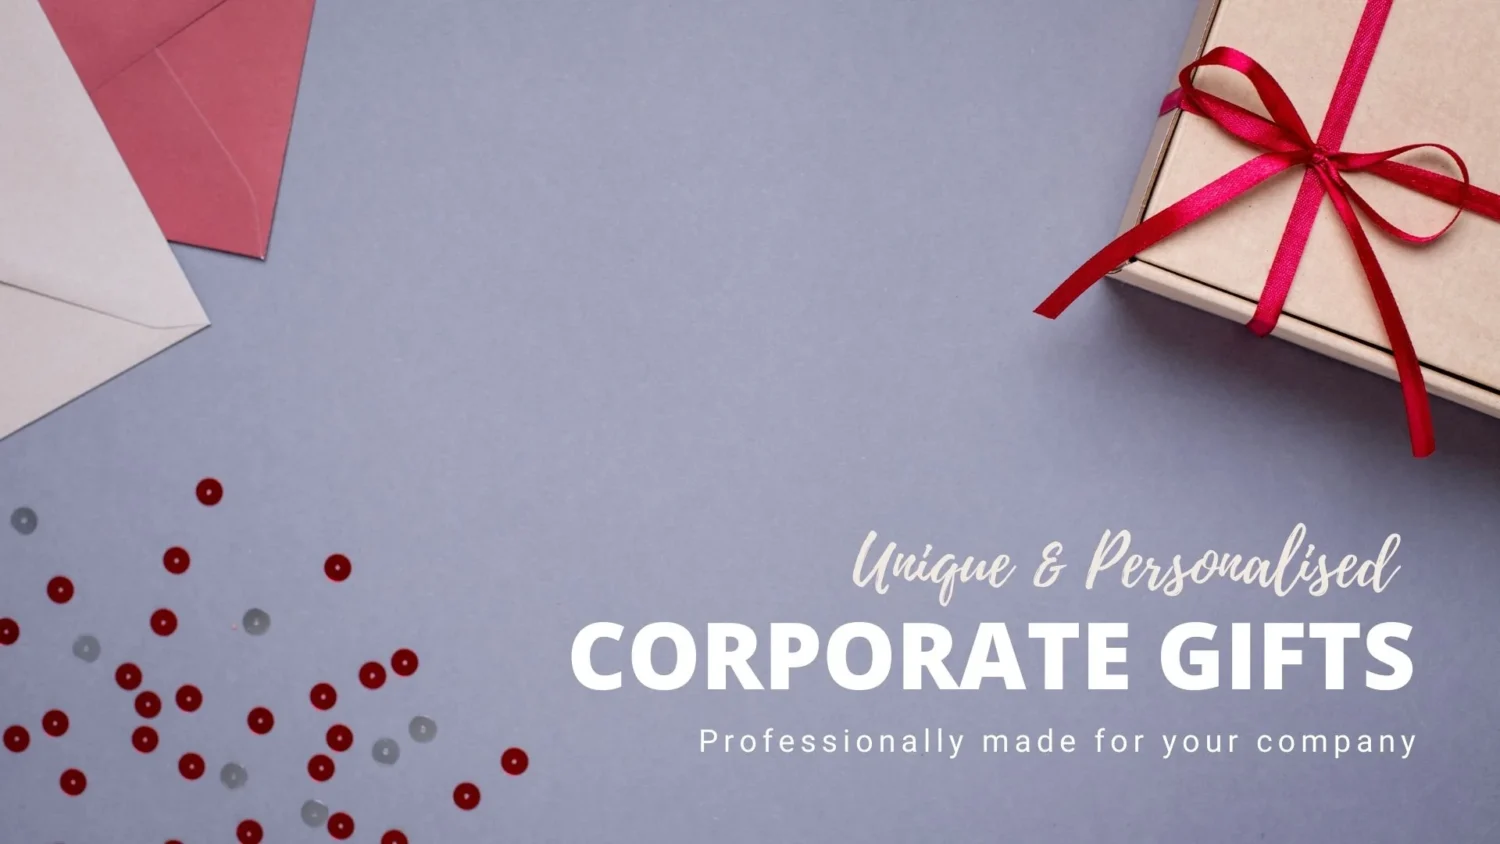 How to Personalise Corporate Gifts for Employees in Singapore